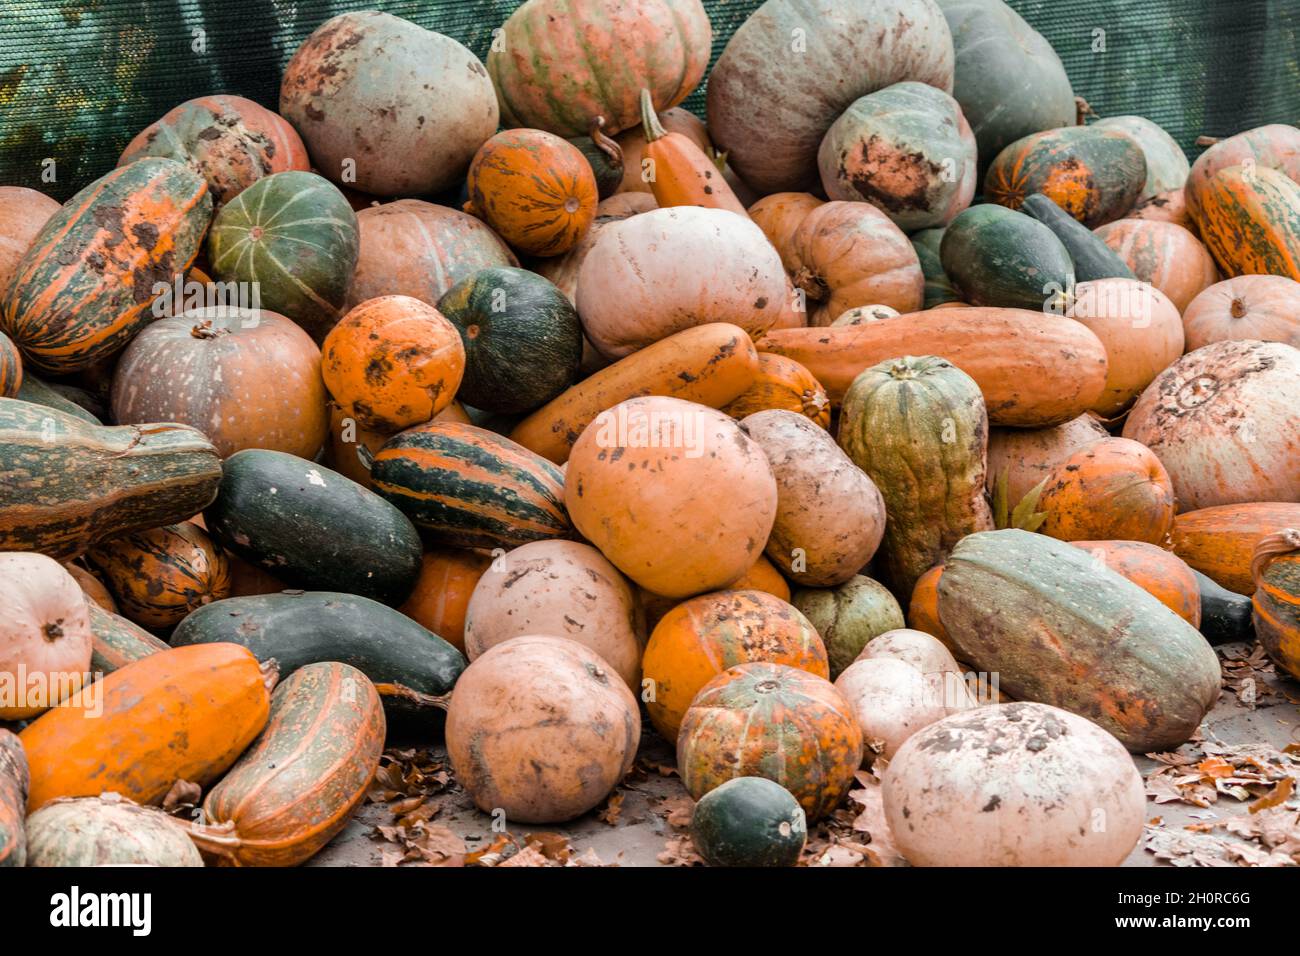 Lots of scattered pumpkin and vegetables. Halloween decorations.  Stock Photo